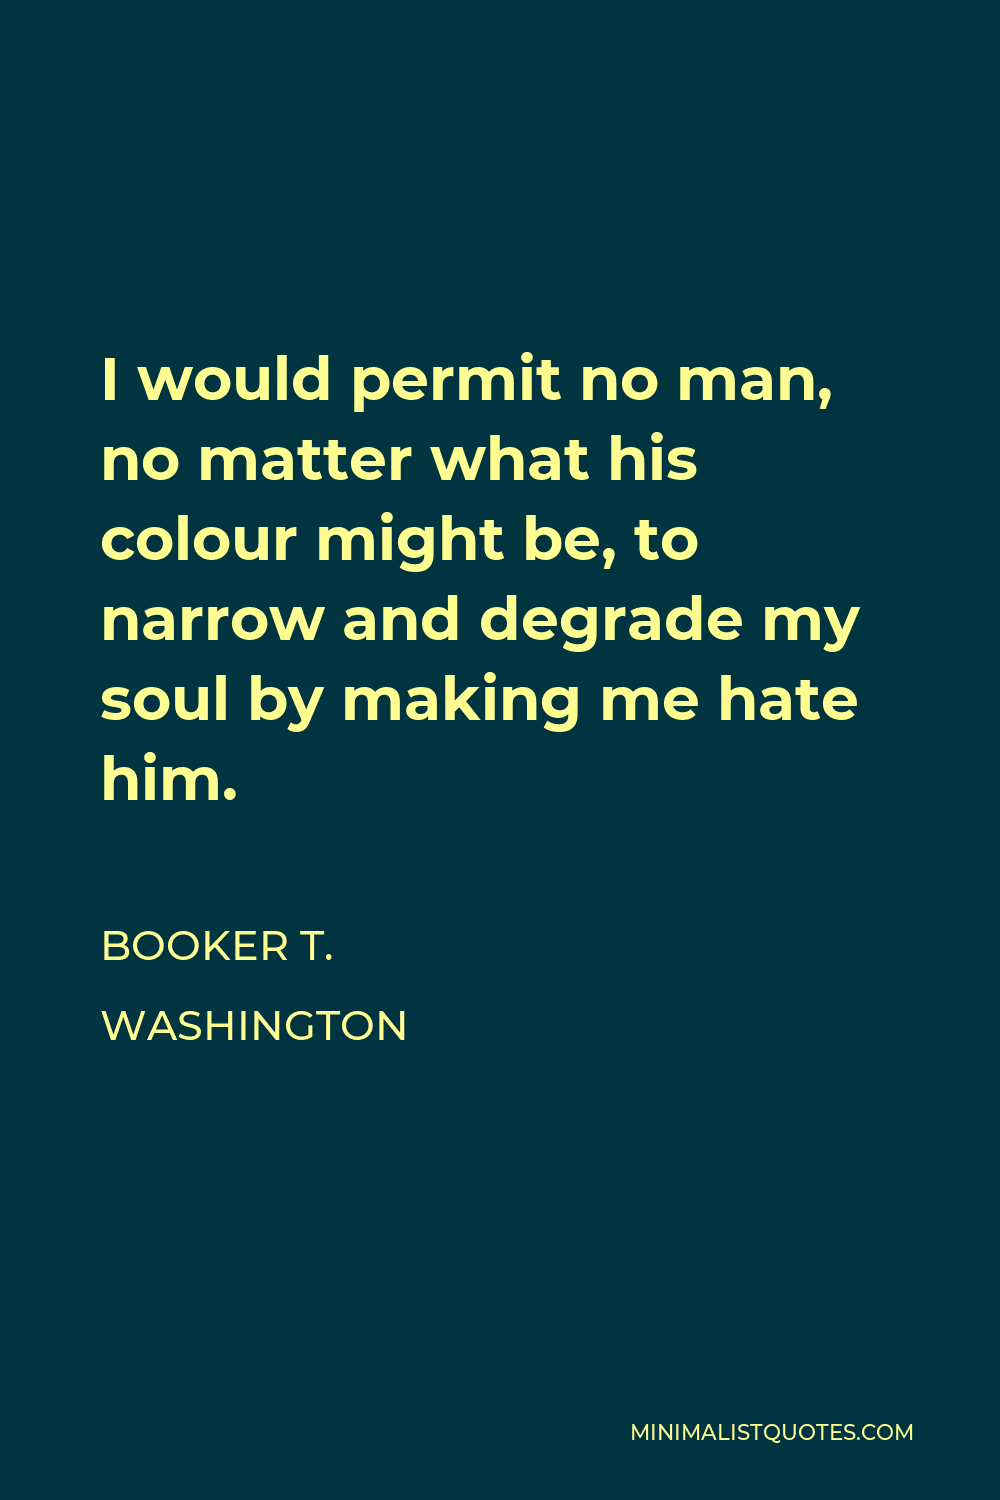 Booker T. Washington Quote - I would permit no man, no matter what his colour might be, to narrow and degrade my soul by making me hate him.